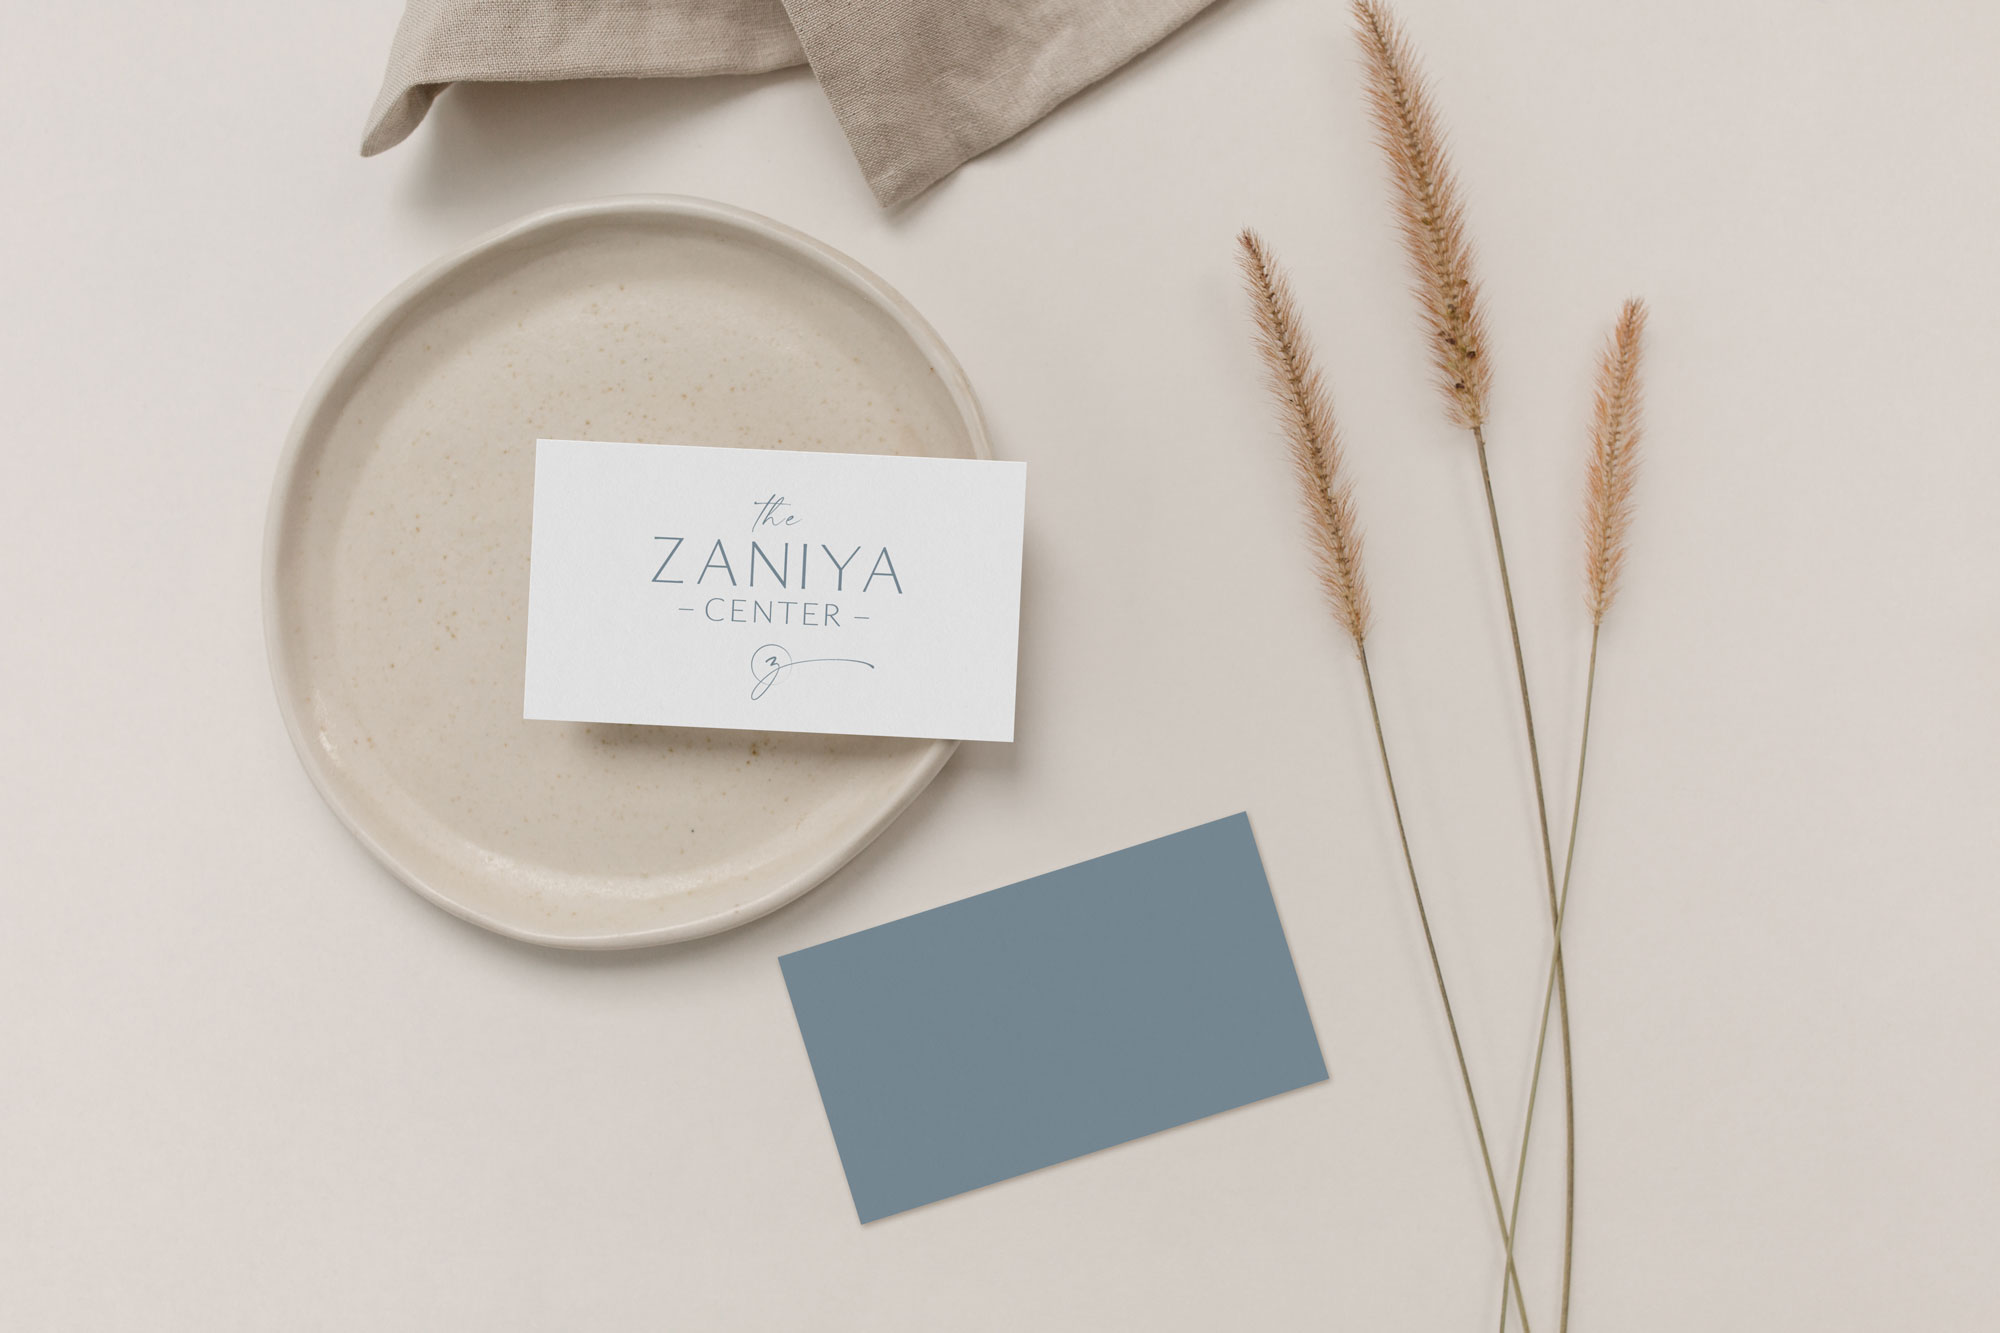 Business card featuring the Zaniya Center logo sitting on a handmade ceramic place on a tan background.
